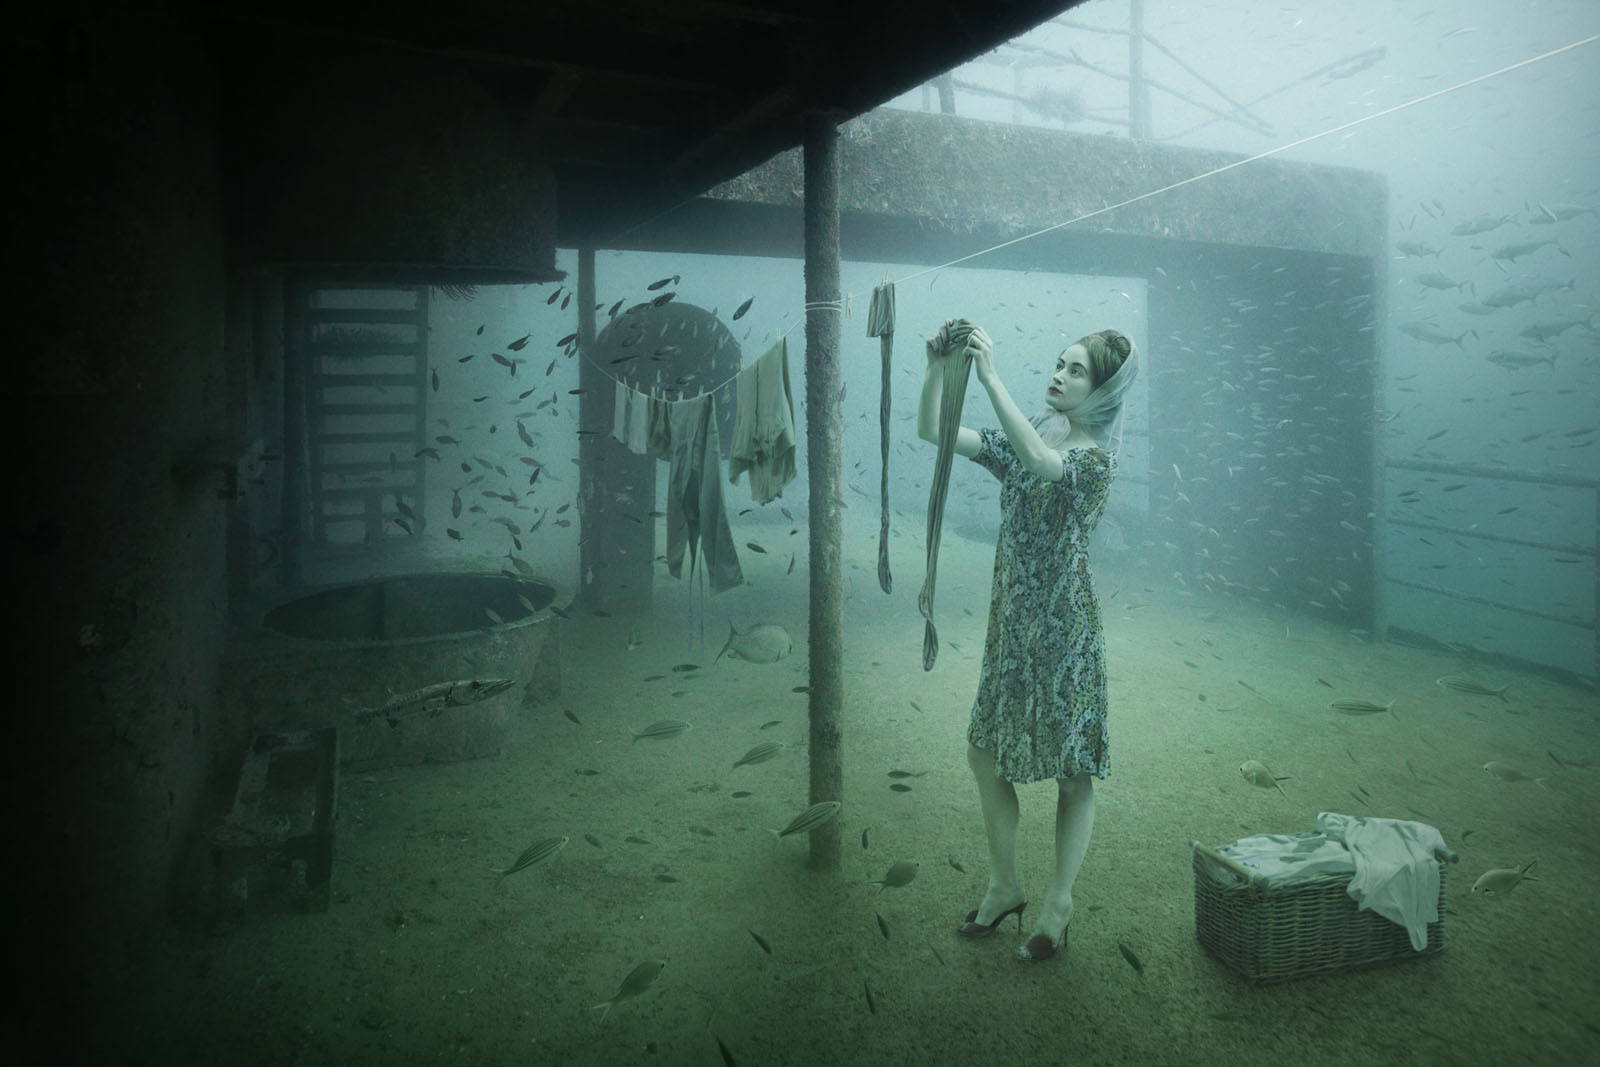 http://l.yimg.com/os/152/2013/03/18/Vandenberg-Project-by-Andreas-Franke-Mrs--Smith-1600-jpg_162352.jpg